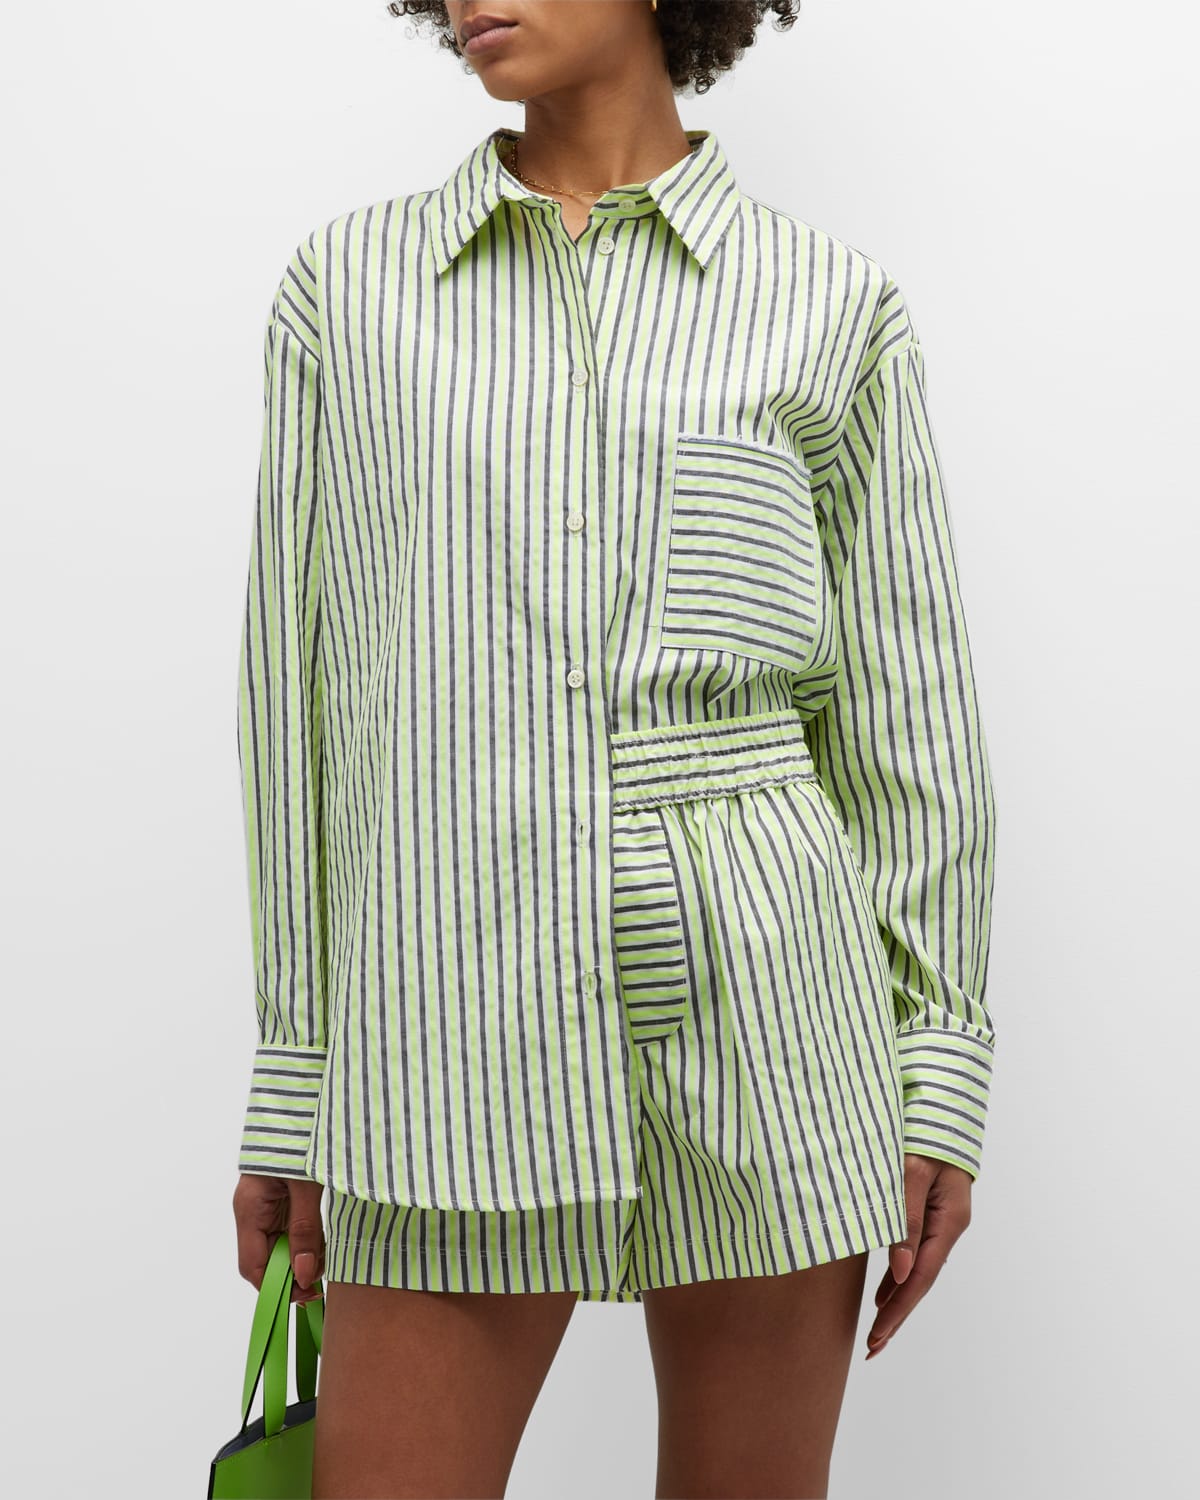 Le Superbe Over You Striped Shirt